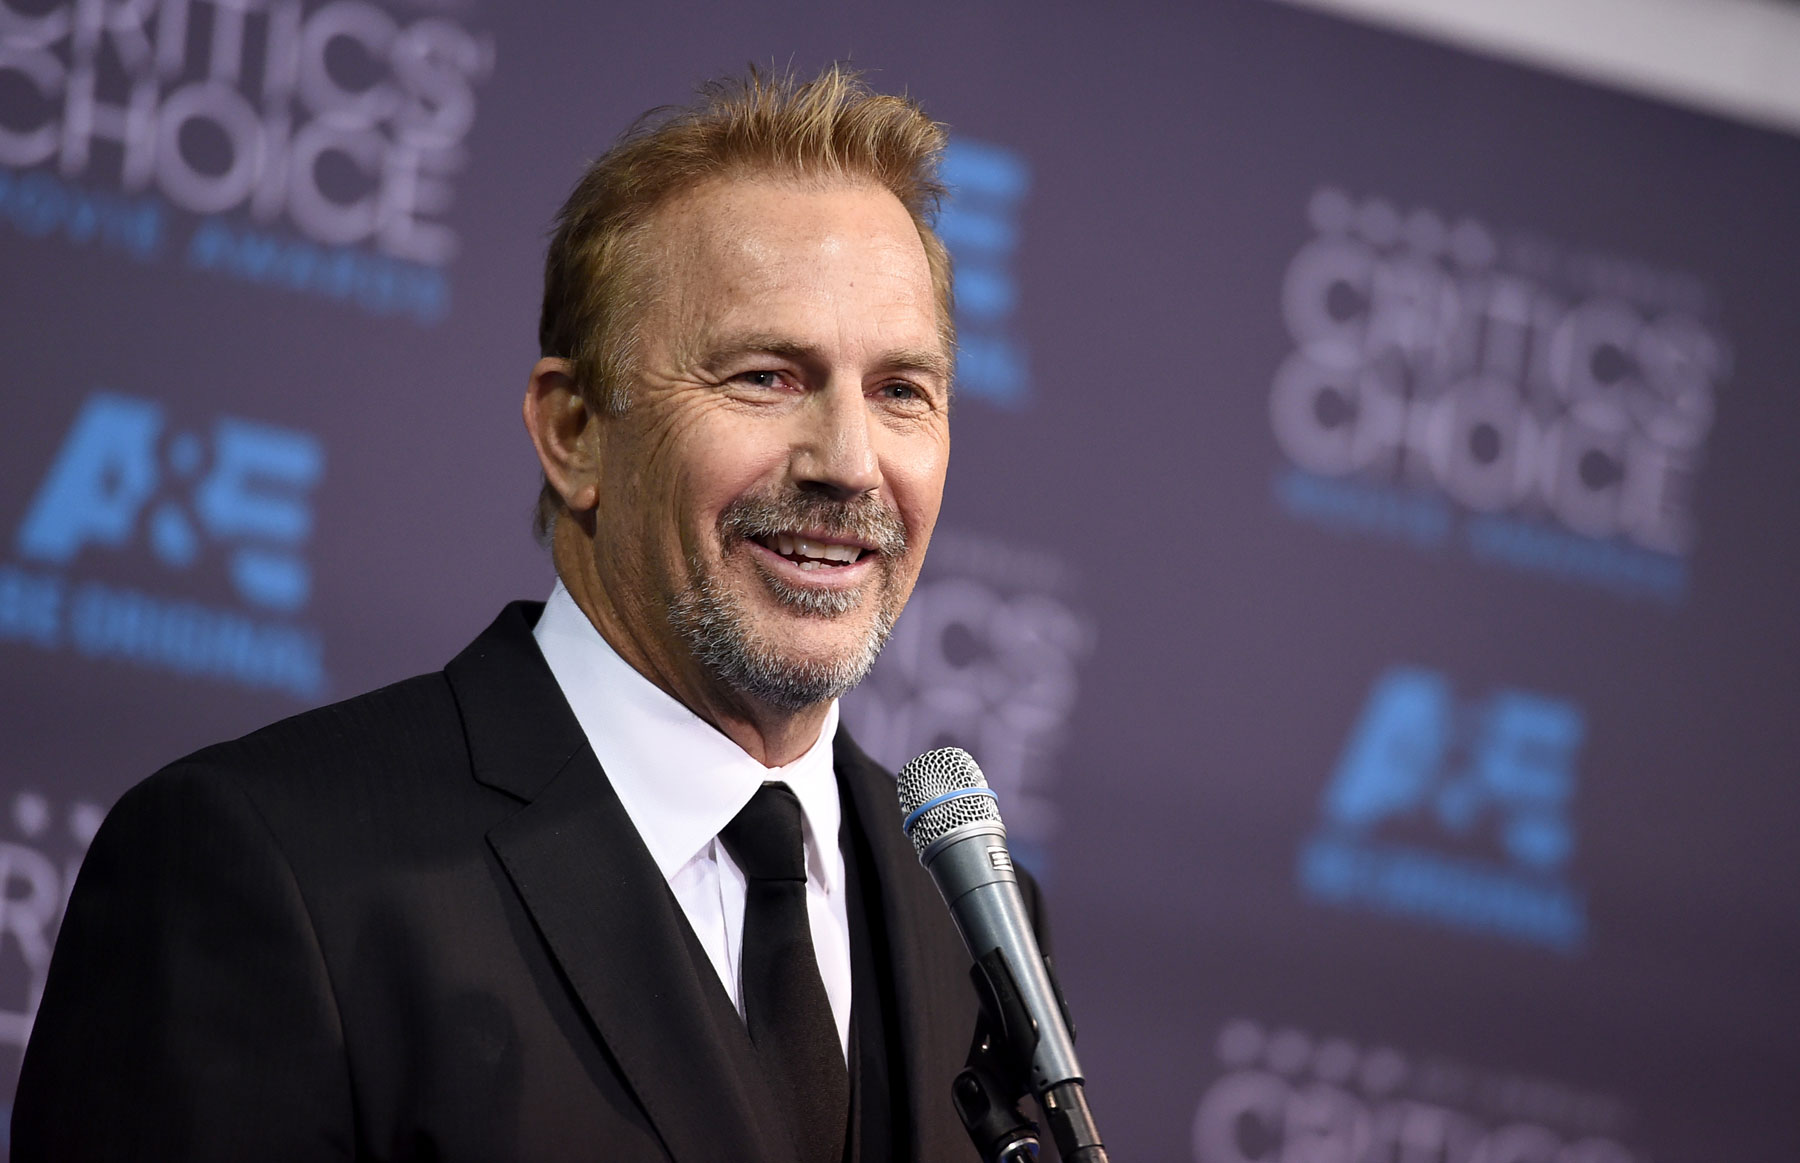 Kevin Costner, winner of the lifetime achievement award, speaks in the press room at the 20th annual Critics' Choice Movie Awards at the Hollywood Palladium on Thursday, Jan. 15, 2015, in Los Angeles. (Photo by Jordan Strauss/Invision/AP)